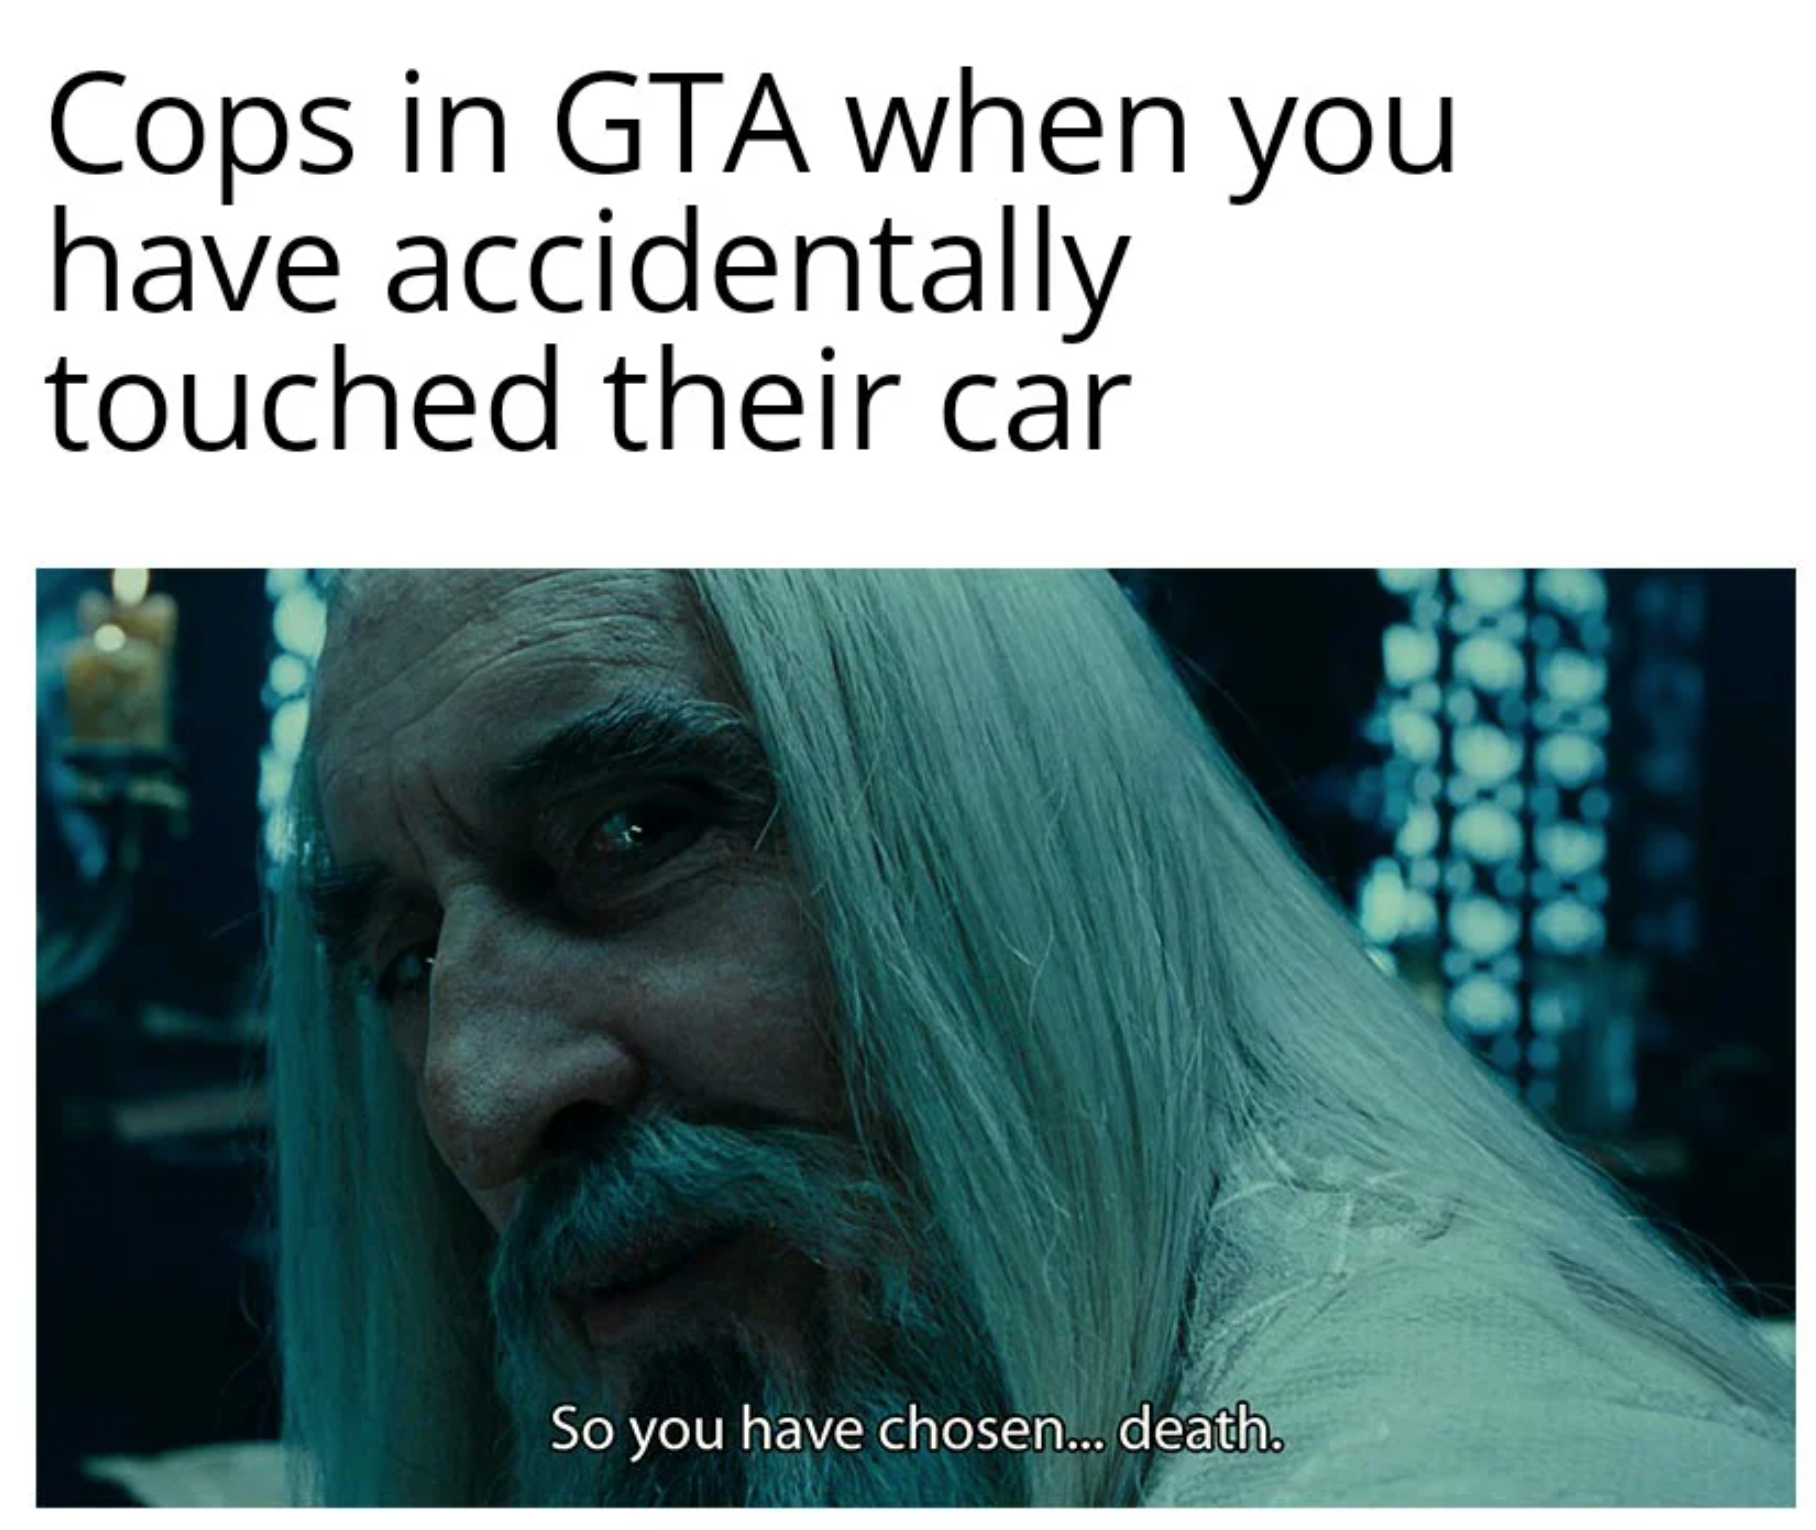 funny gaming memes - so you know how some sins are unforgivable meme - Cops in Gta when you have accidentally touched their car So you have chosen... death.